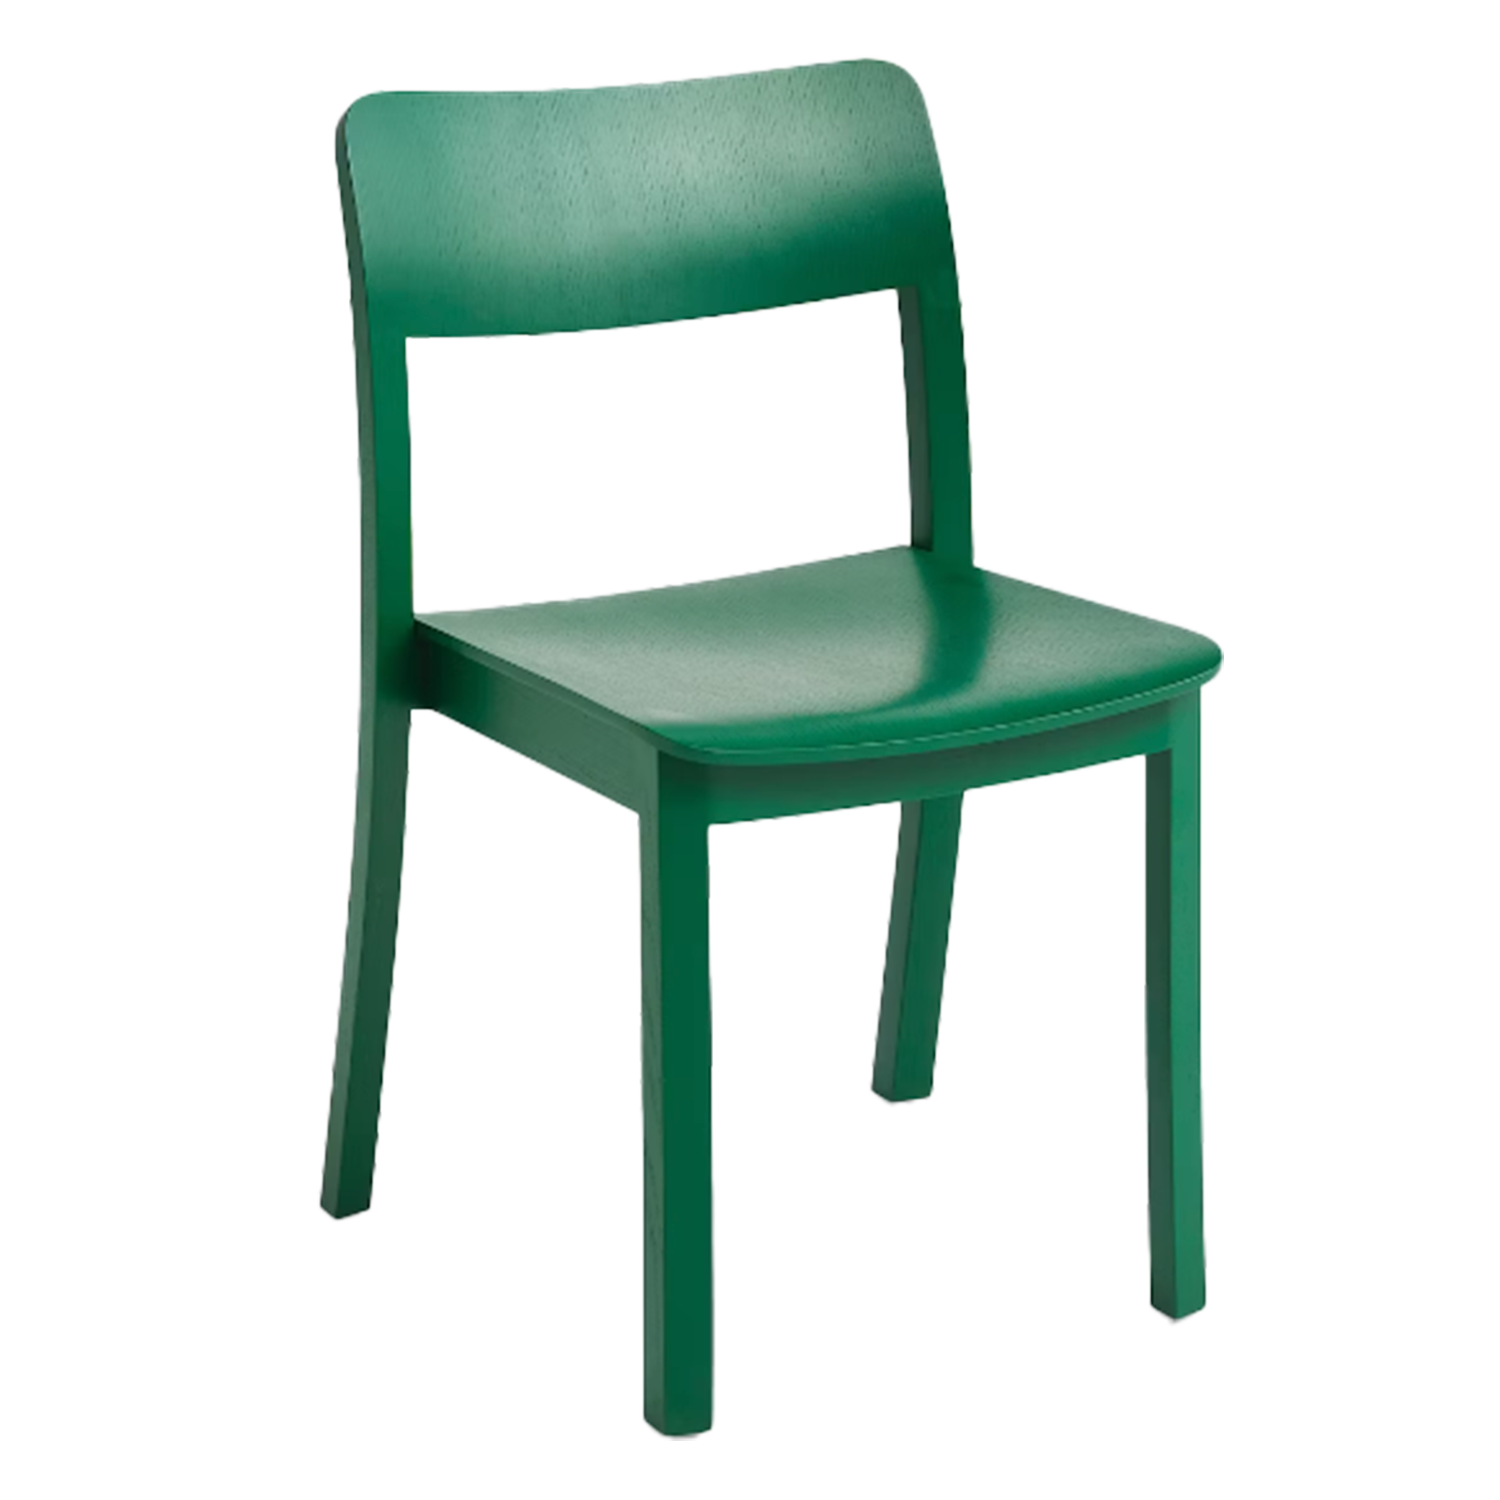 Pastis green dining chair